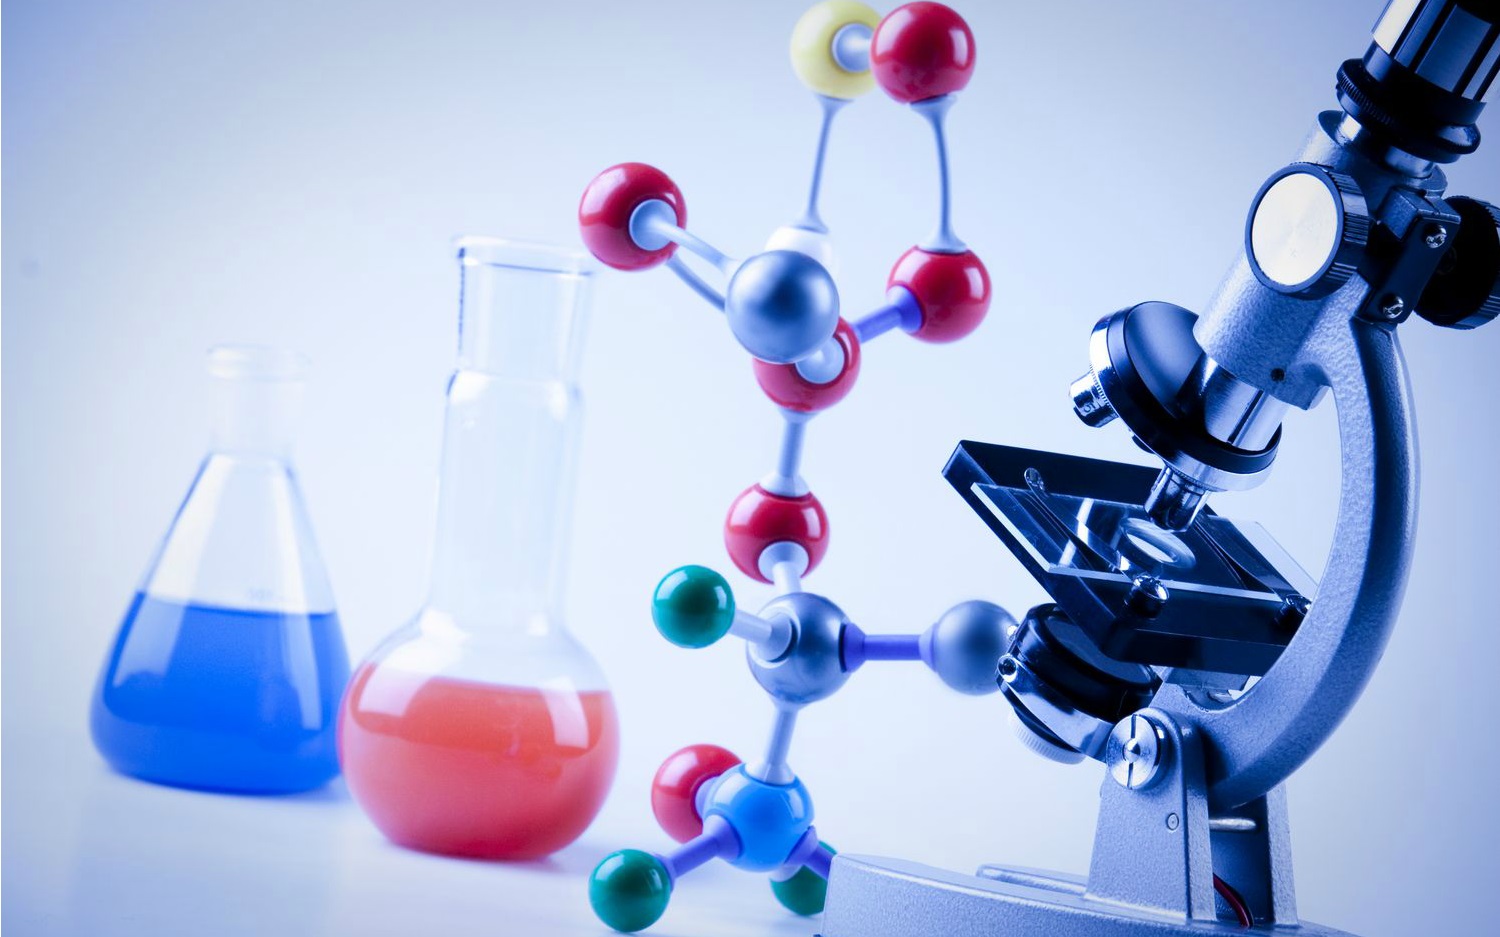 Life Science Tools and Reagents Market